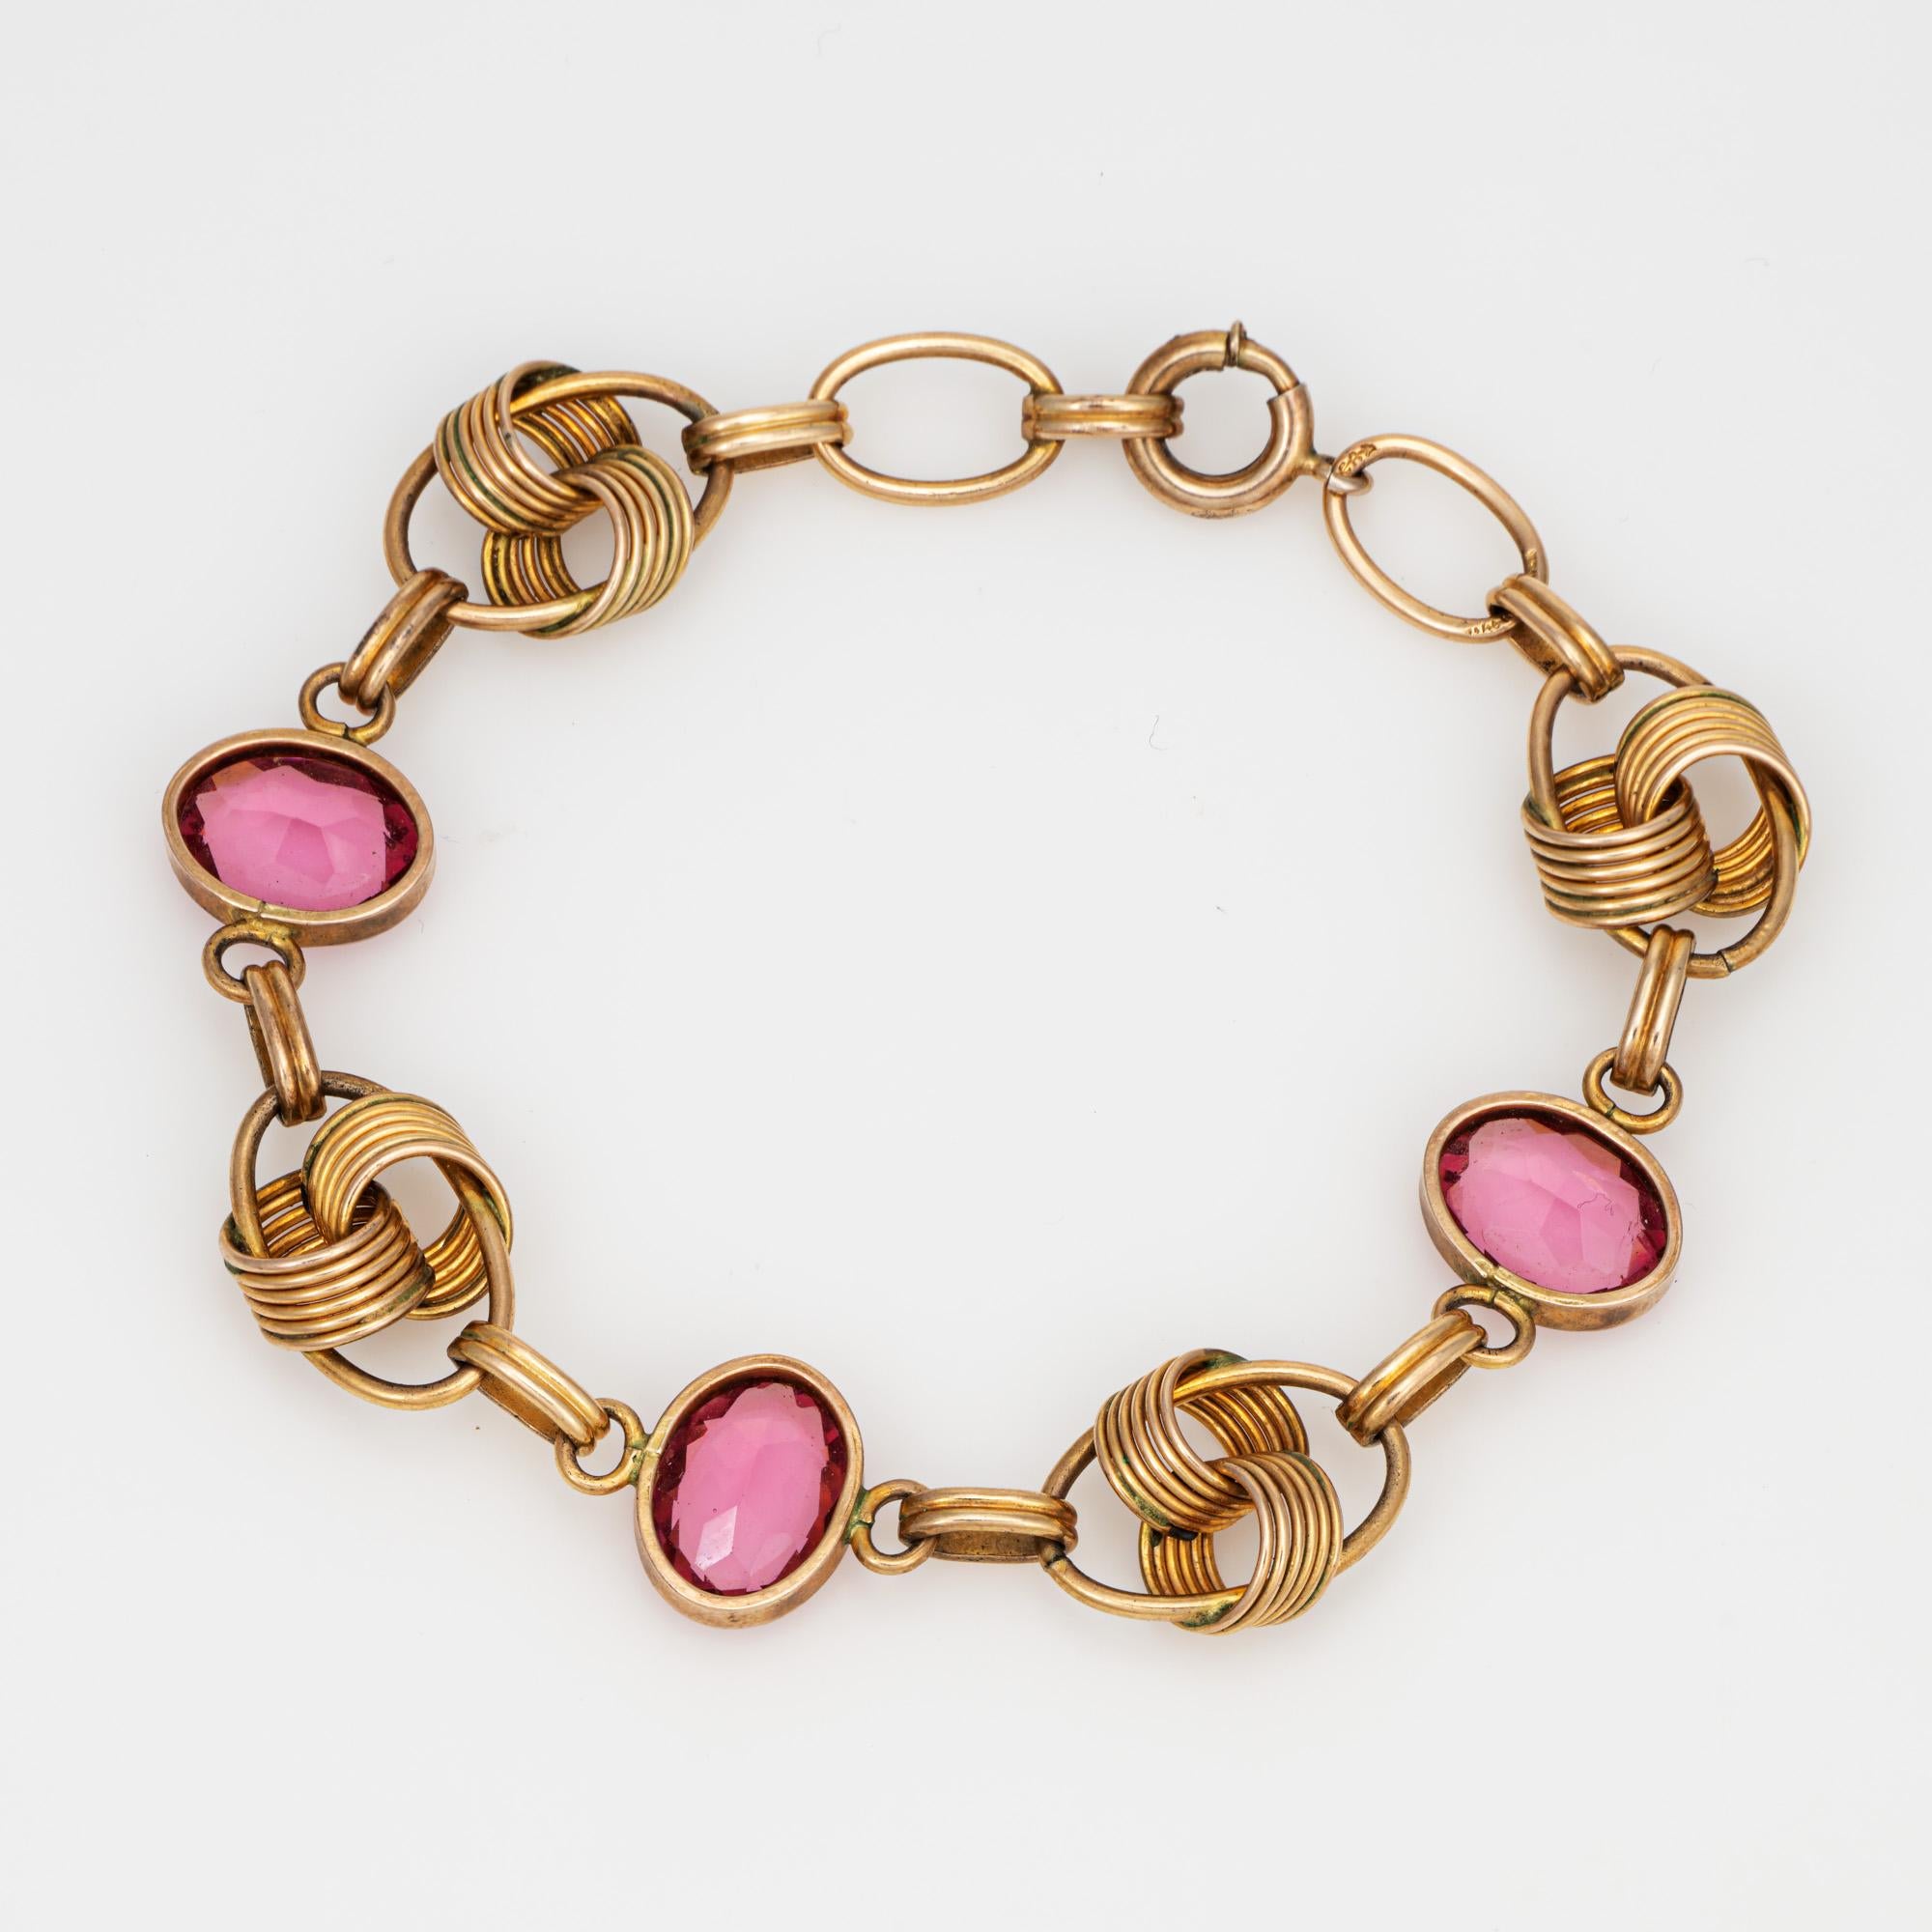 Stylish and nicely detailed vintage letter pink tourmaline bracelet crafted in 14 karat yellow gold (circa 1960s). 

Faceted oval cut pink tourmaline measure 11mm x 9mm (estimated at 2.50 carats each - 7.50 carats total estimated weight). The pink